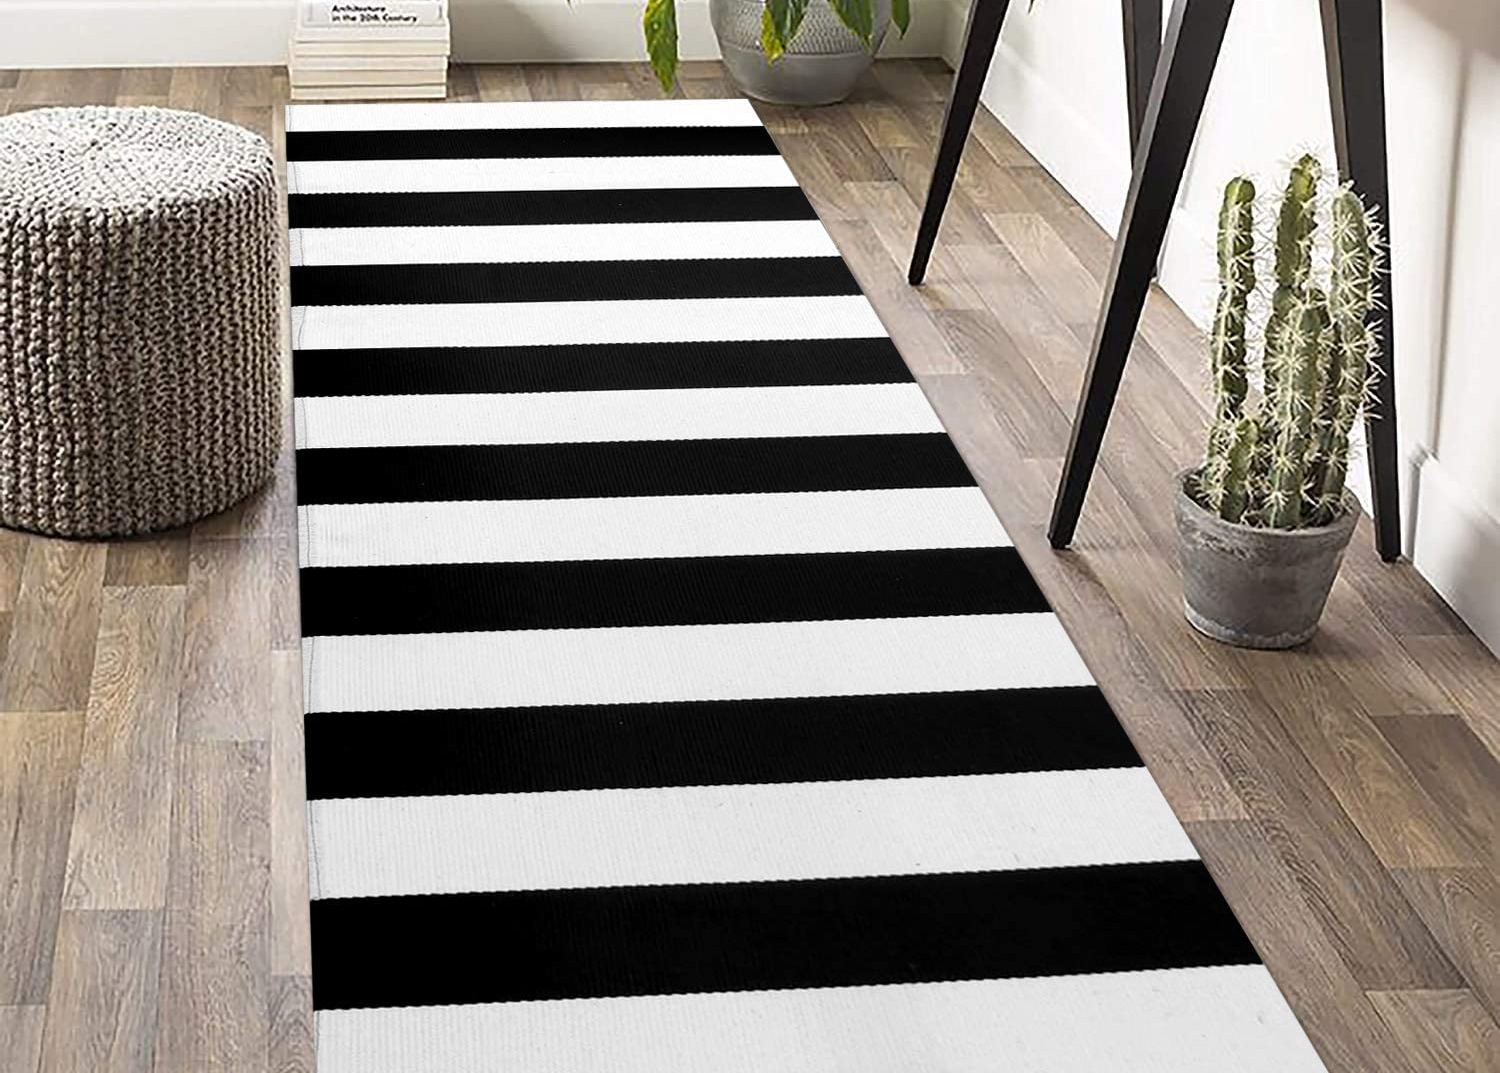 Black and White Striped Cotton Woven Indoor Outdoor Runner Rug